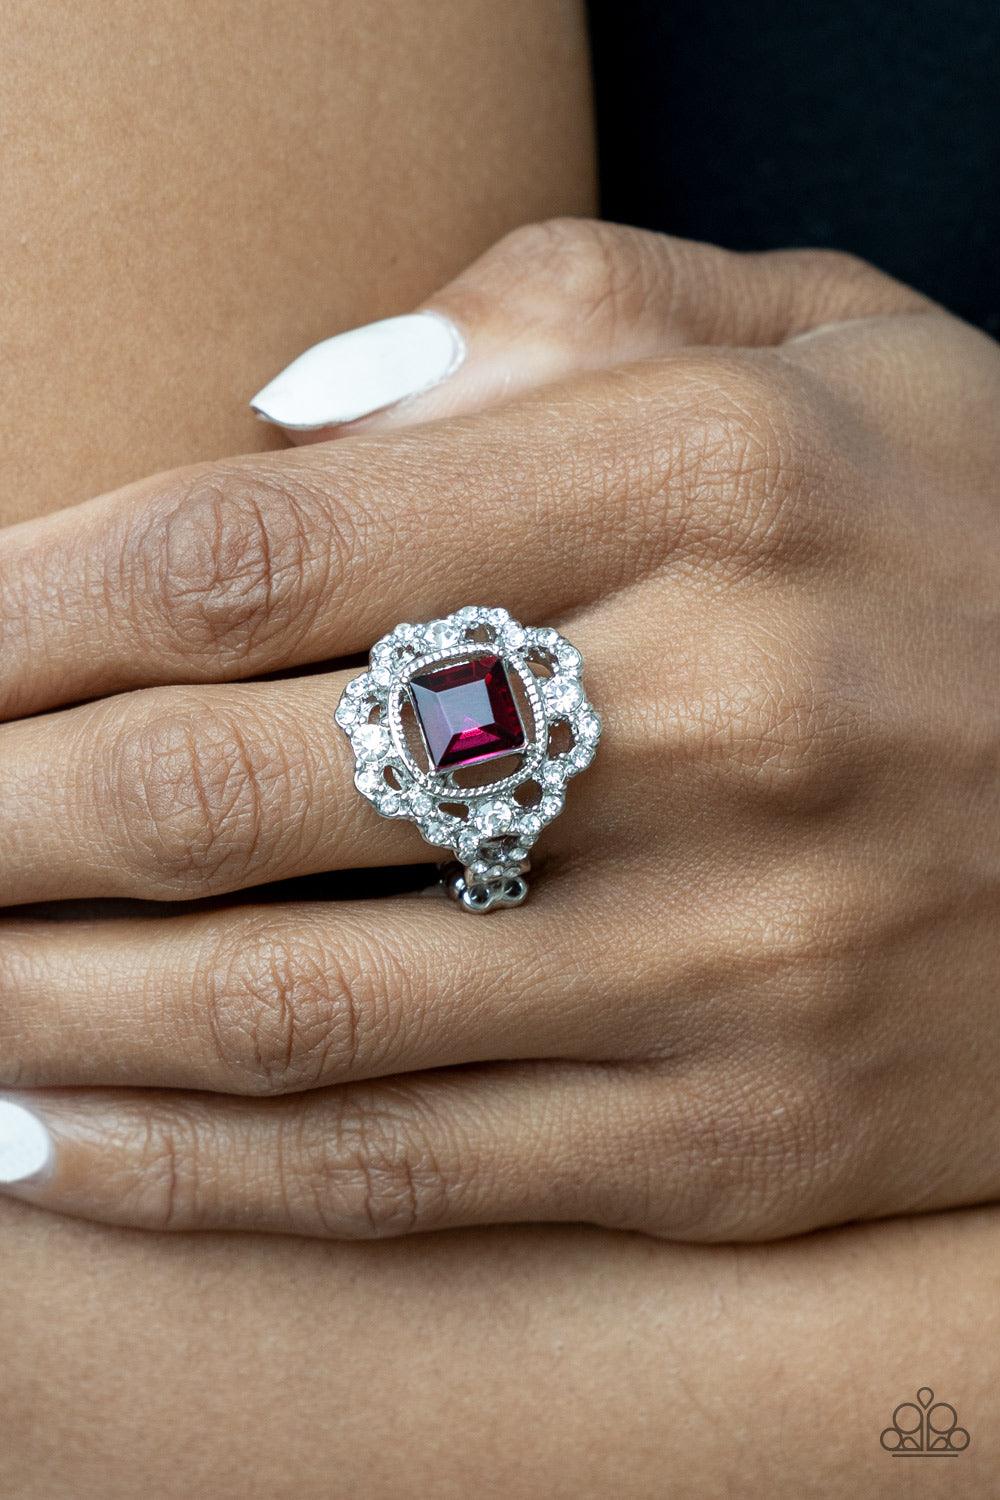 Candid Charisma Pink Ring - Jewelry by Bretta